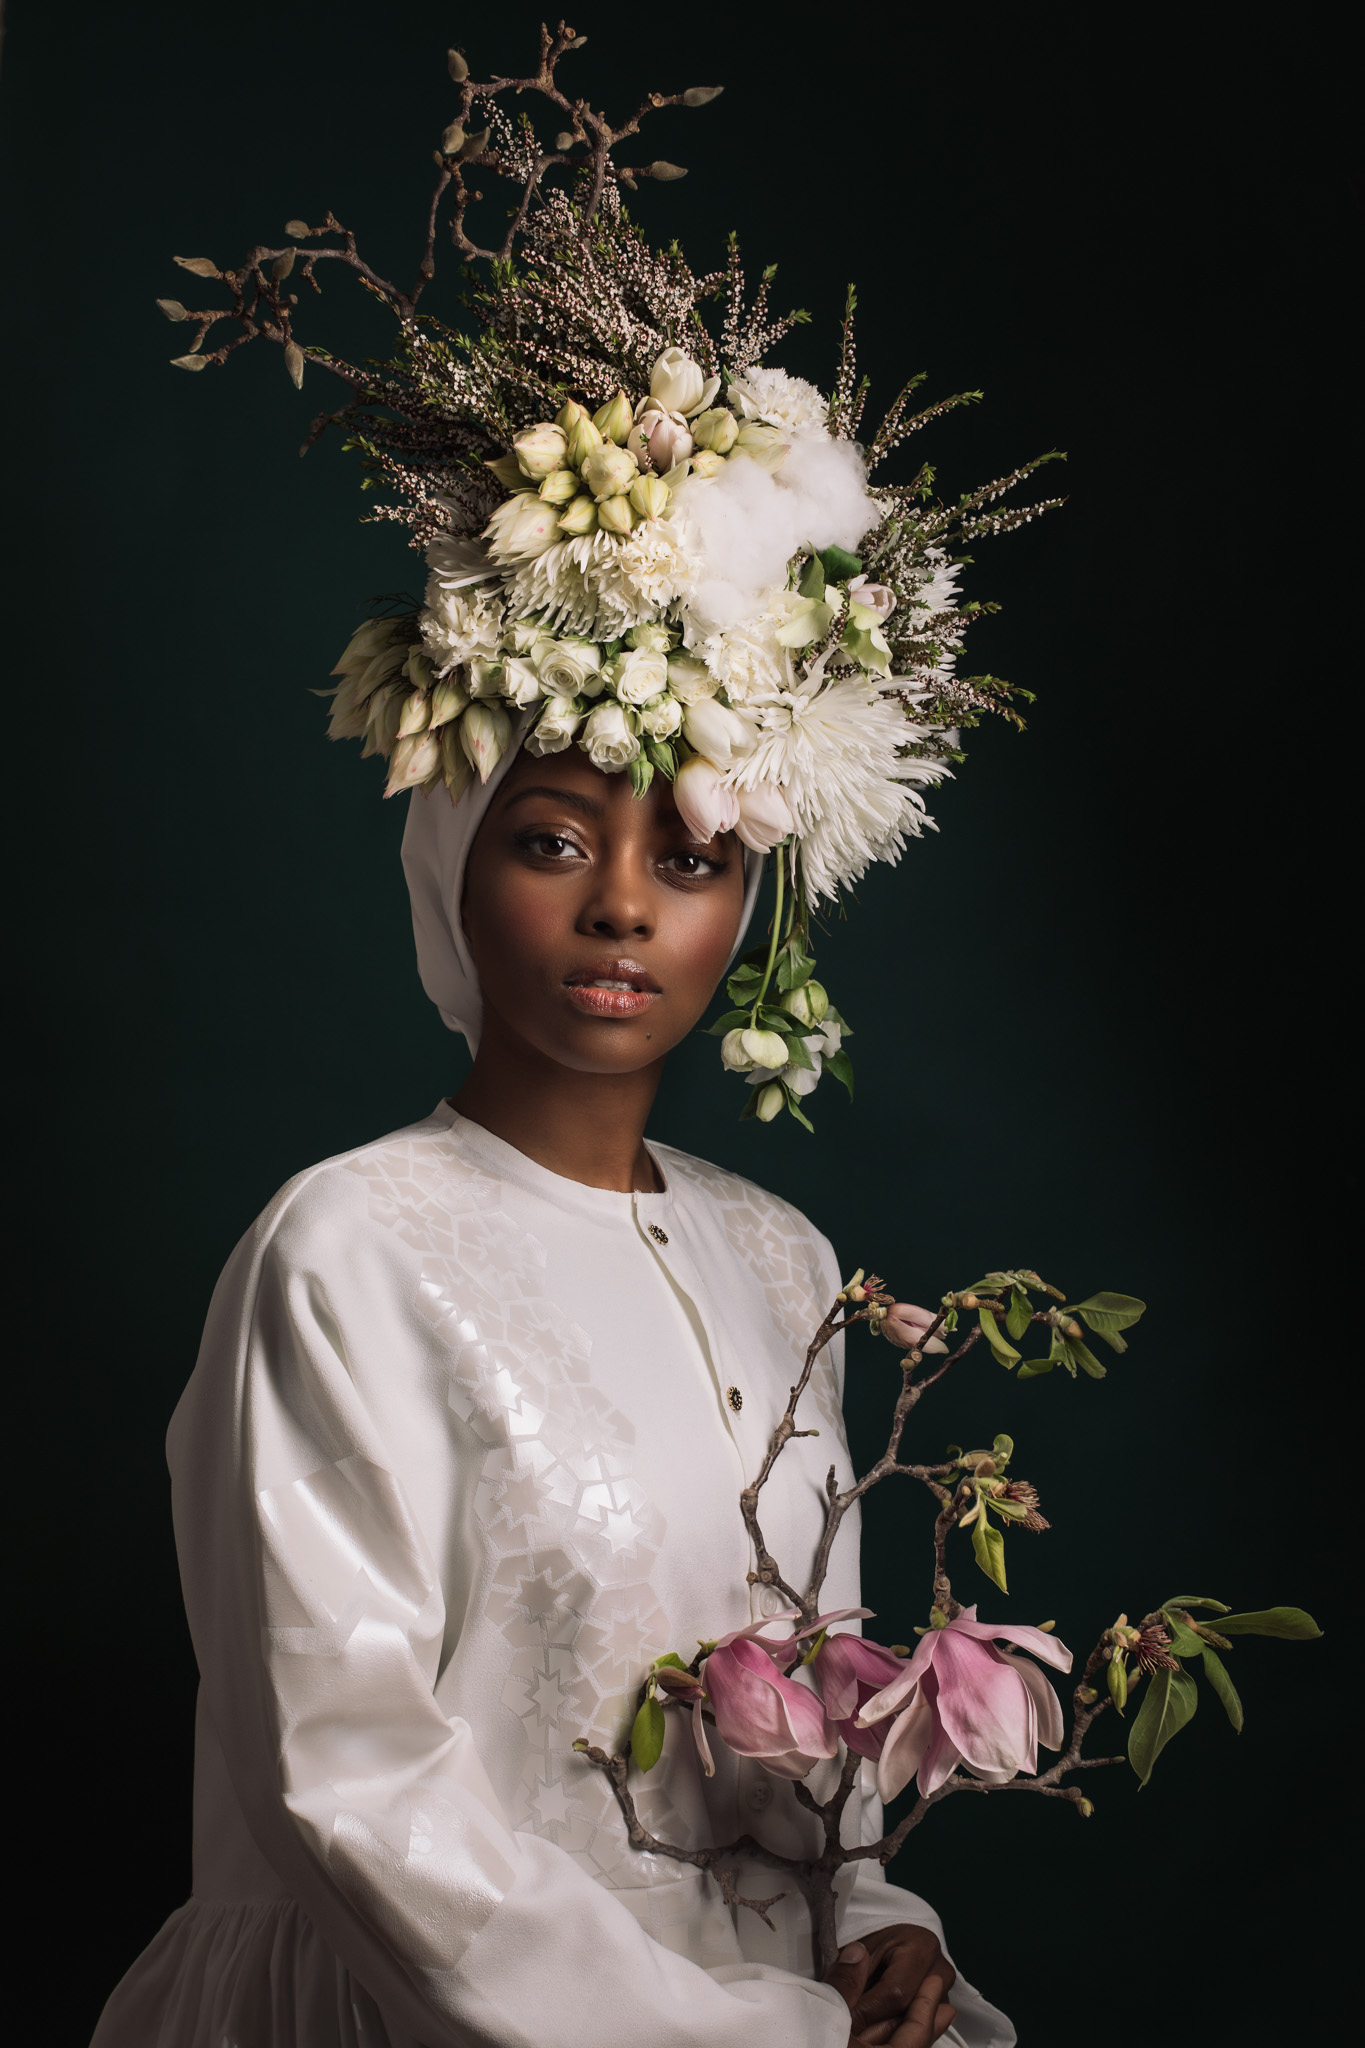 Boshia | Floral Designs and Styling by The Lillipillian